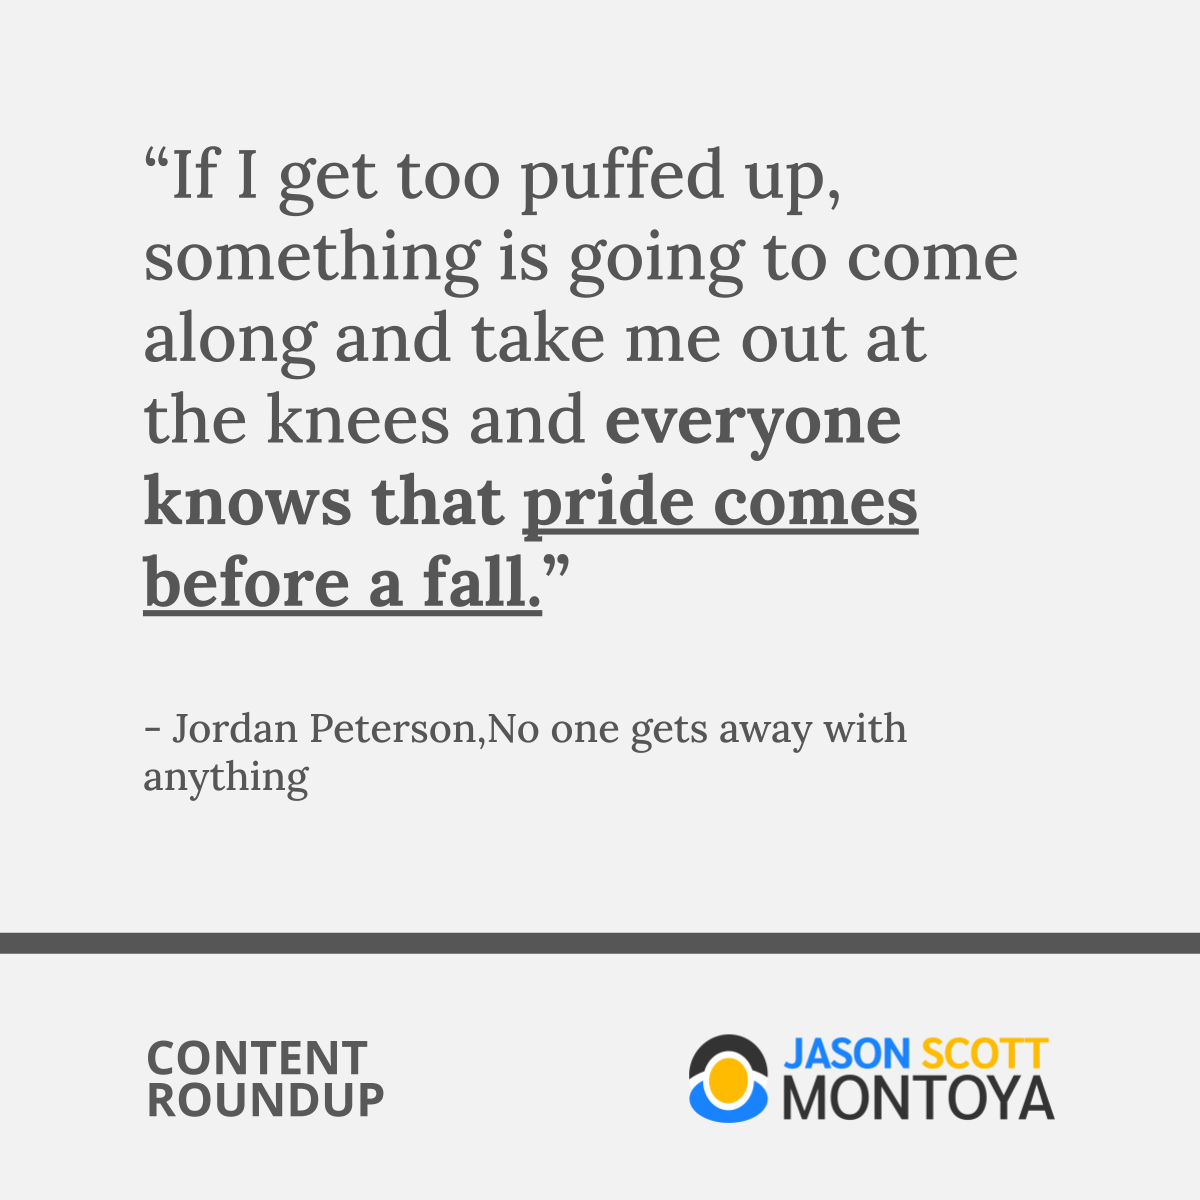 “If I get too puffed up, something is going to come along and take me out at the knees and everyone knows that pride comes before a fall.”  - Jordan Peterson,No one gets away with anything